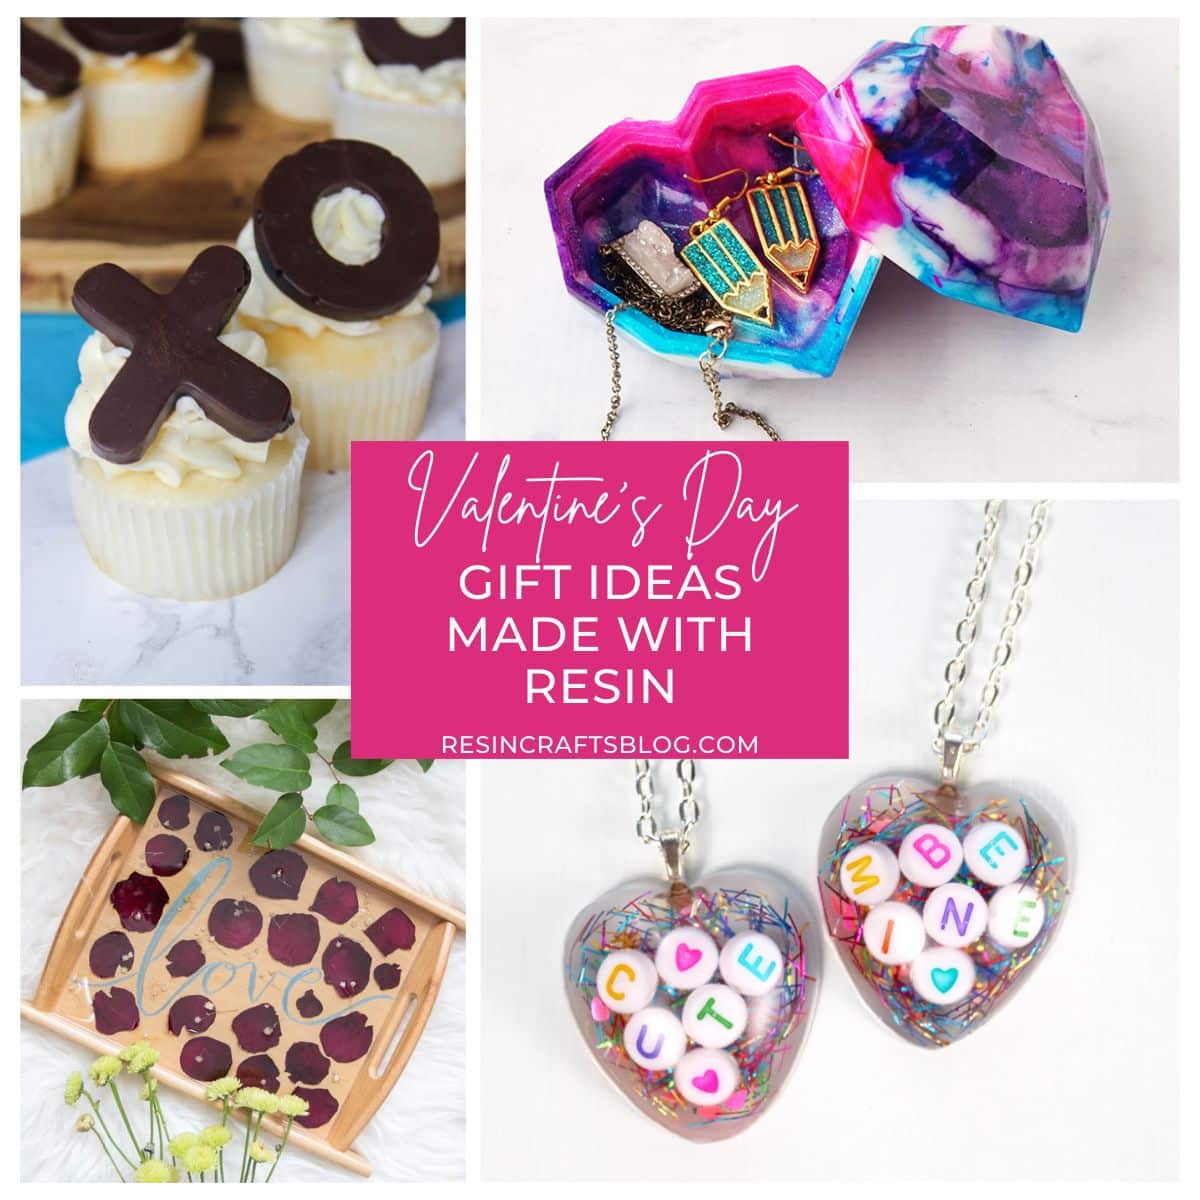 Valentine's Day gifts to make with resin